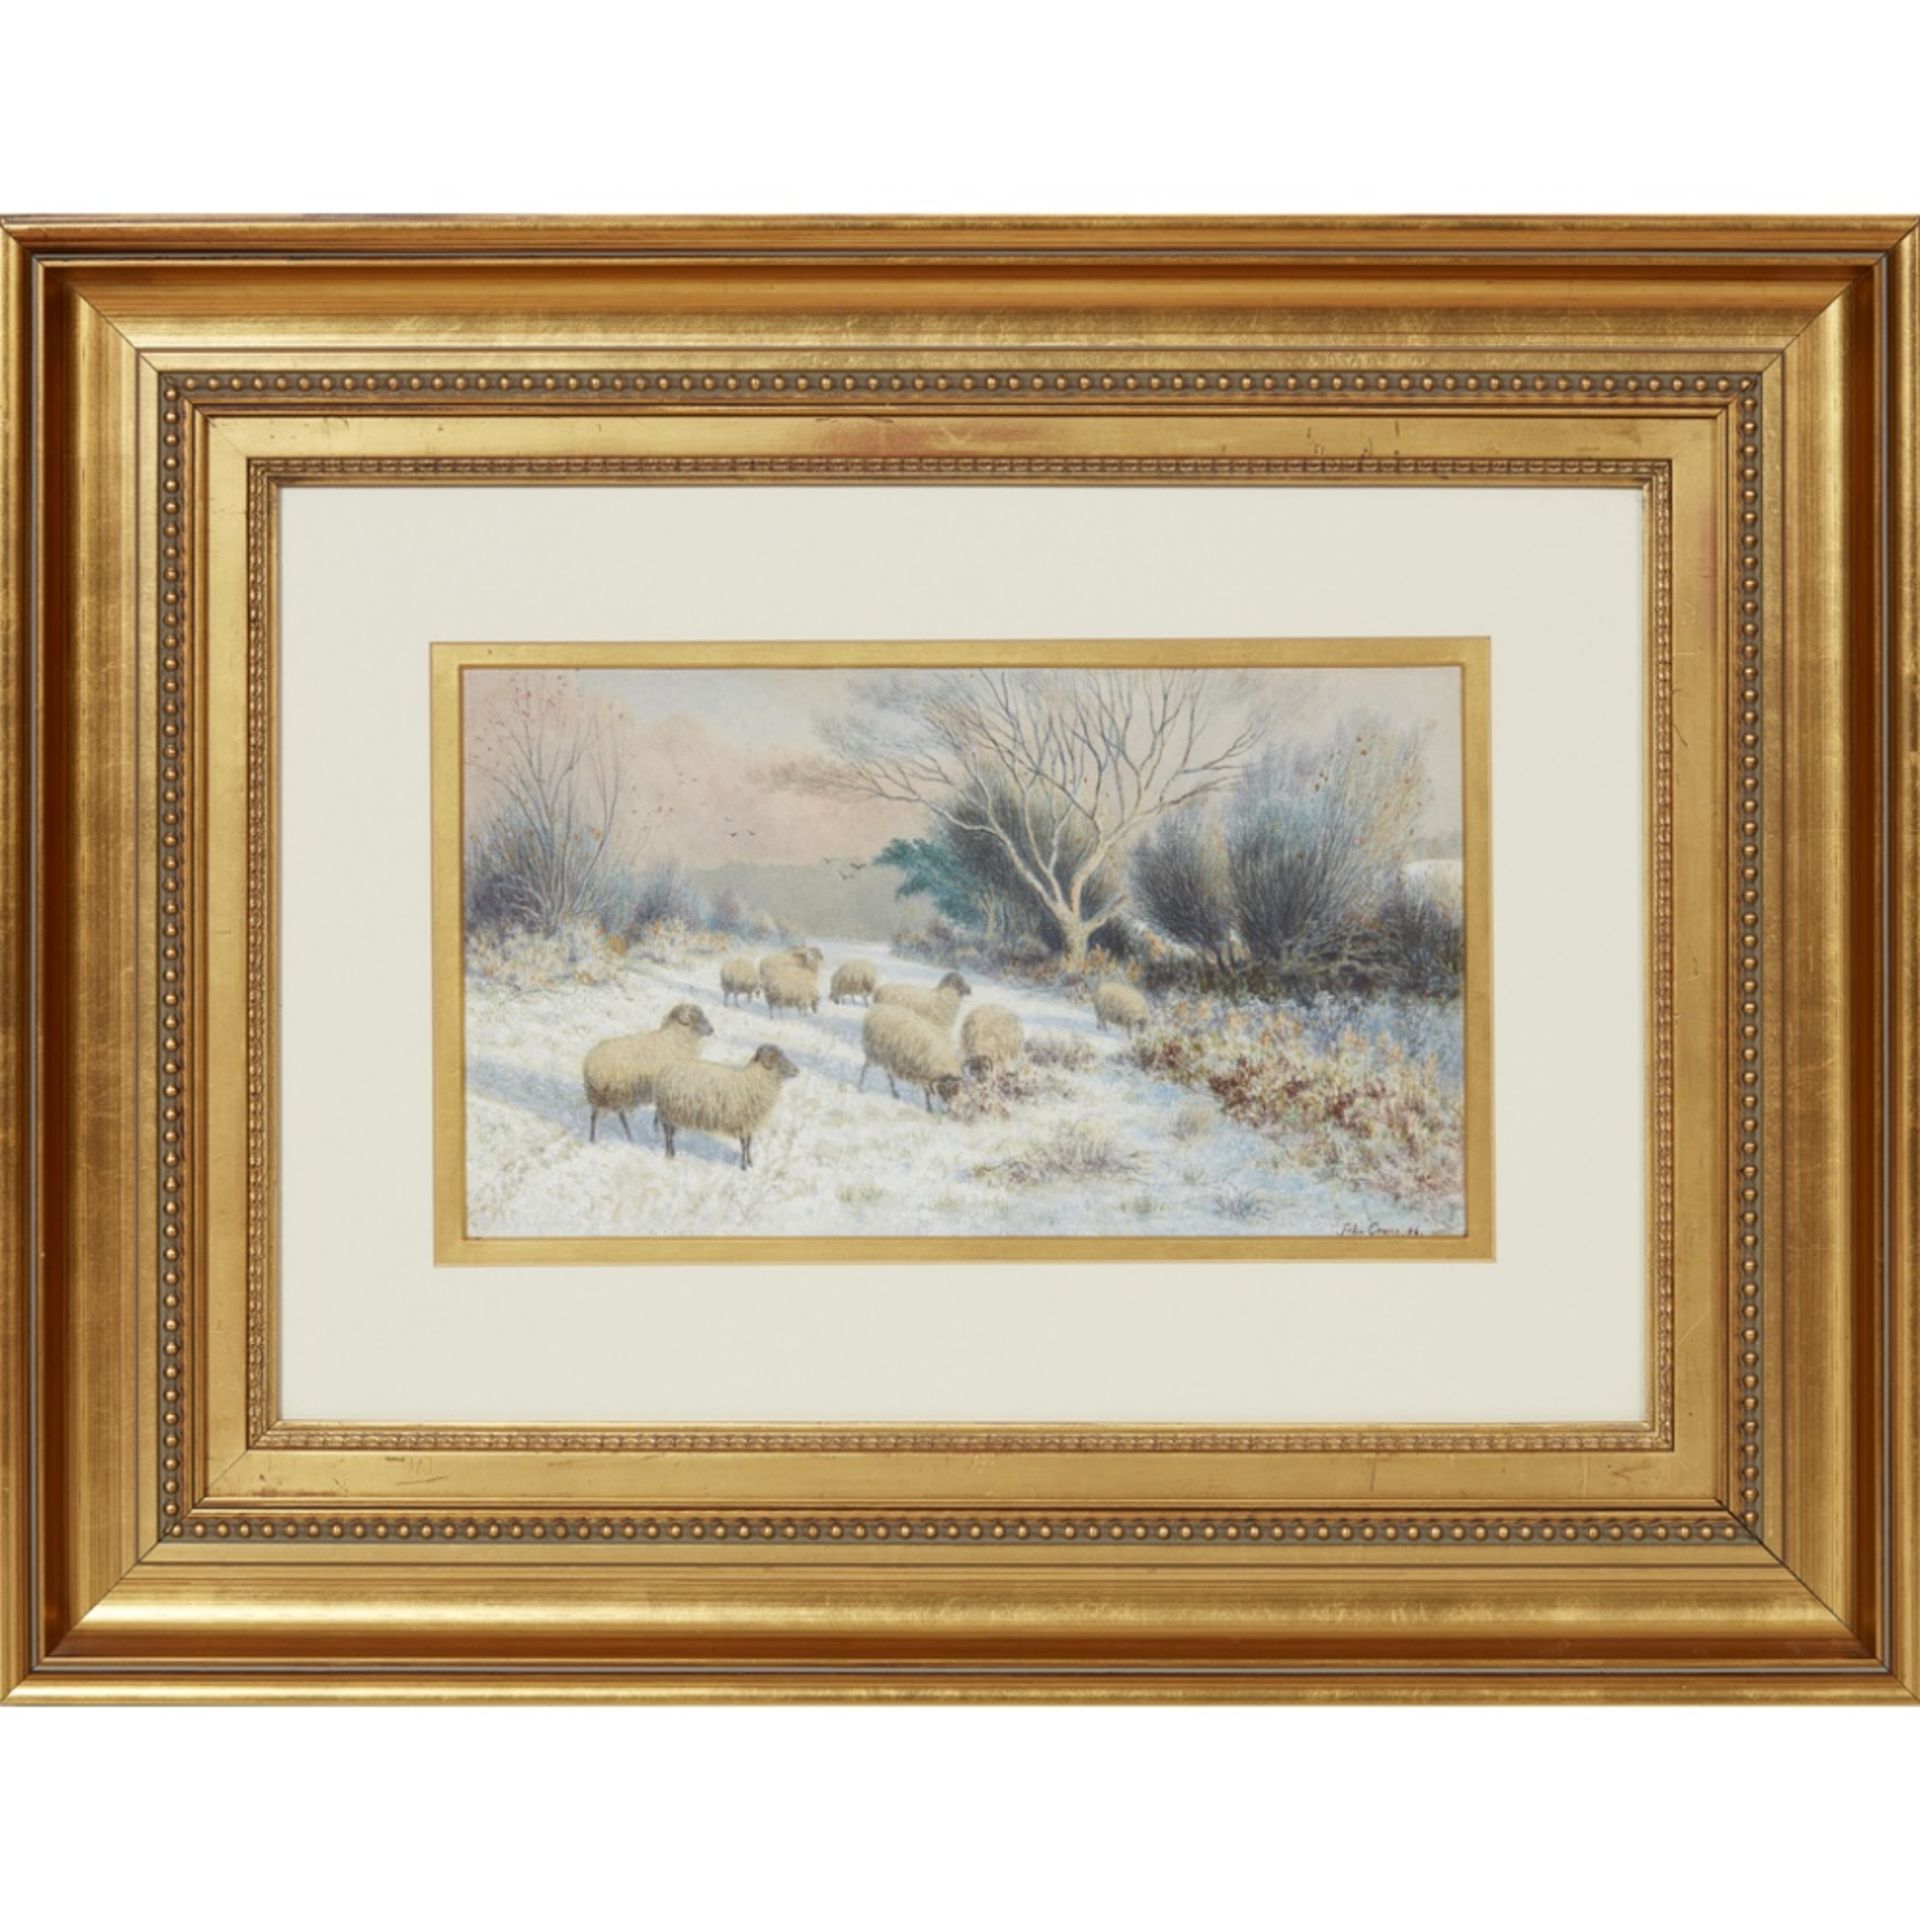 JOHN GRANT (19TH/ 20TH CENTURY, BRITISH) SHEEP IN SNOW Signed and dated ‘86, watercolour 20cm x 85cm